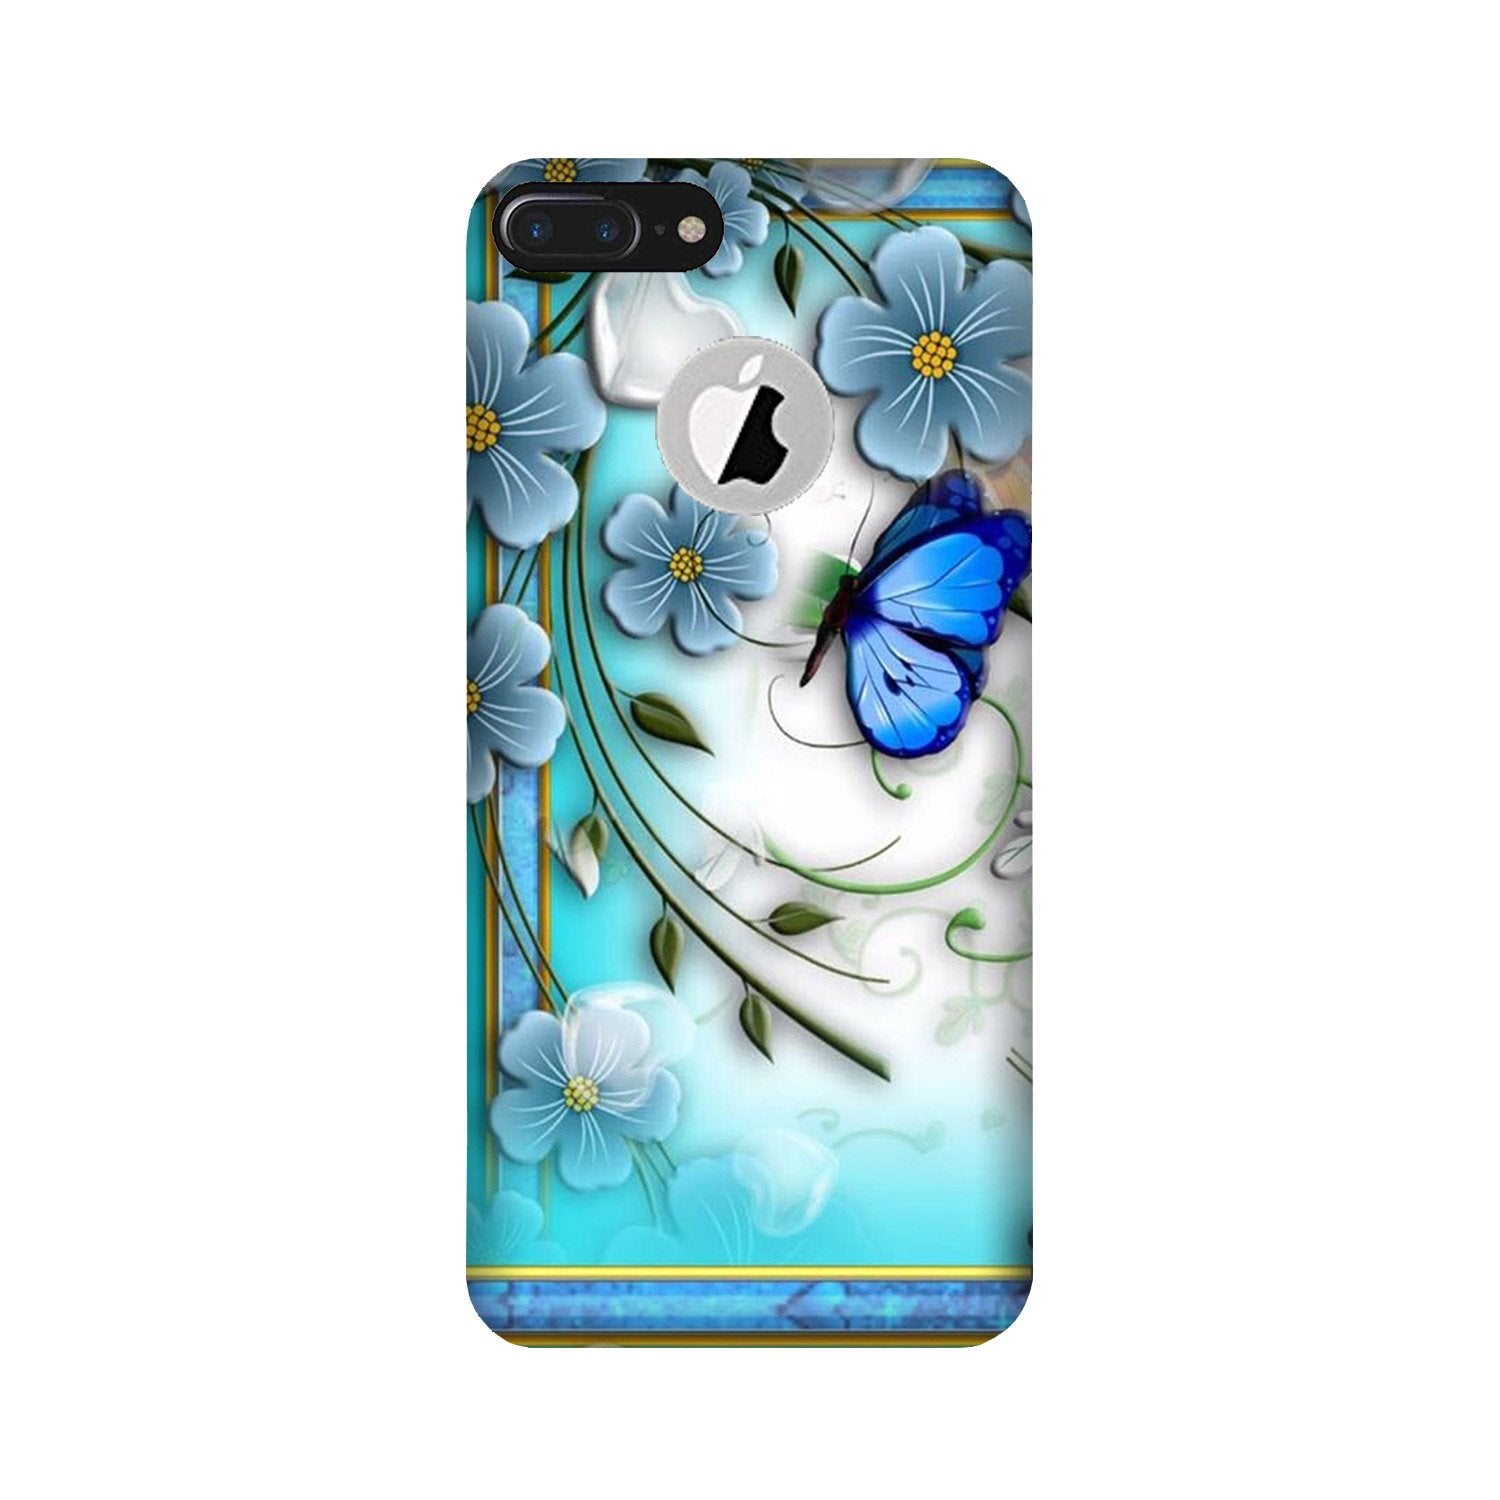 Blue Butterfly Case for iPhone 7 Plus logo cut